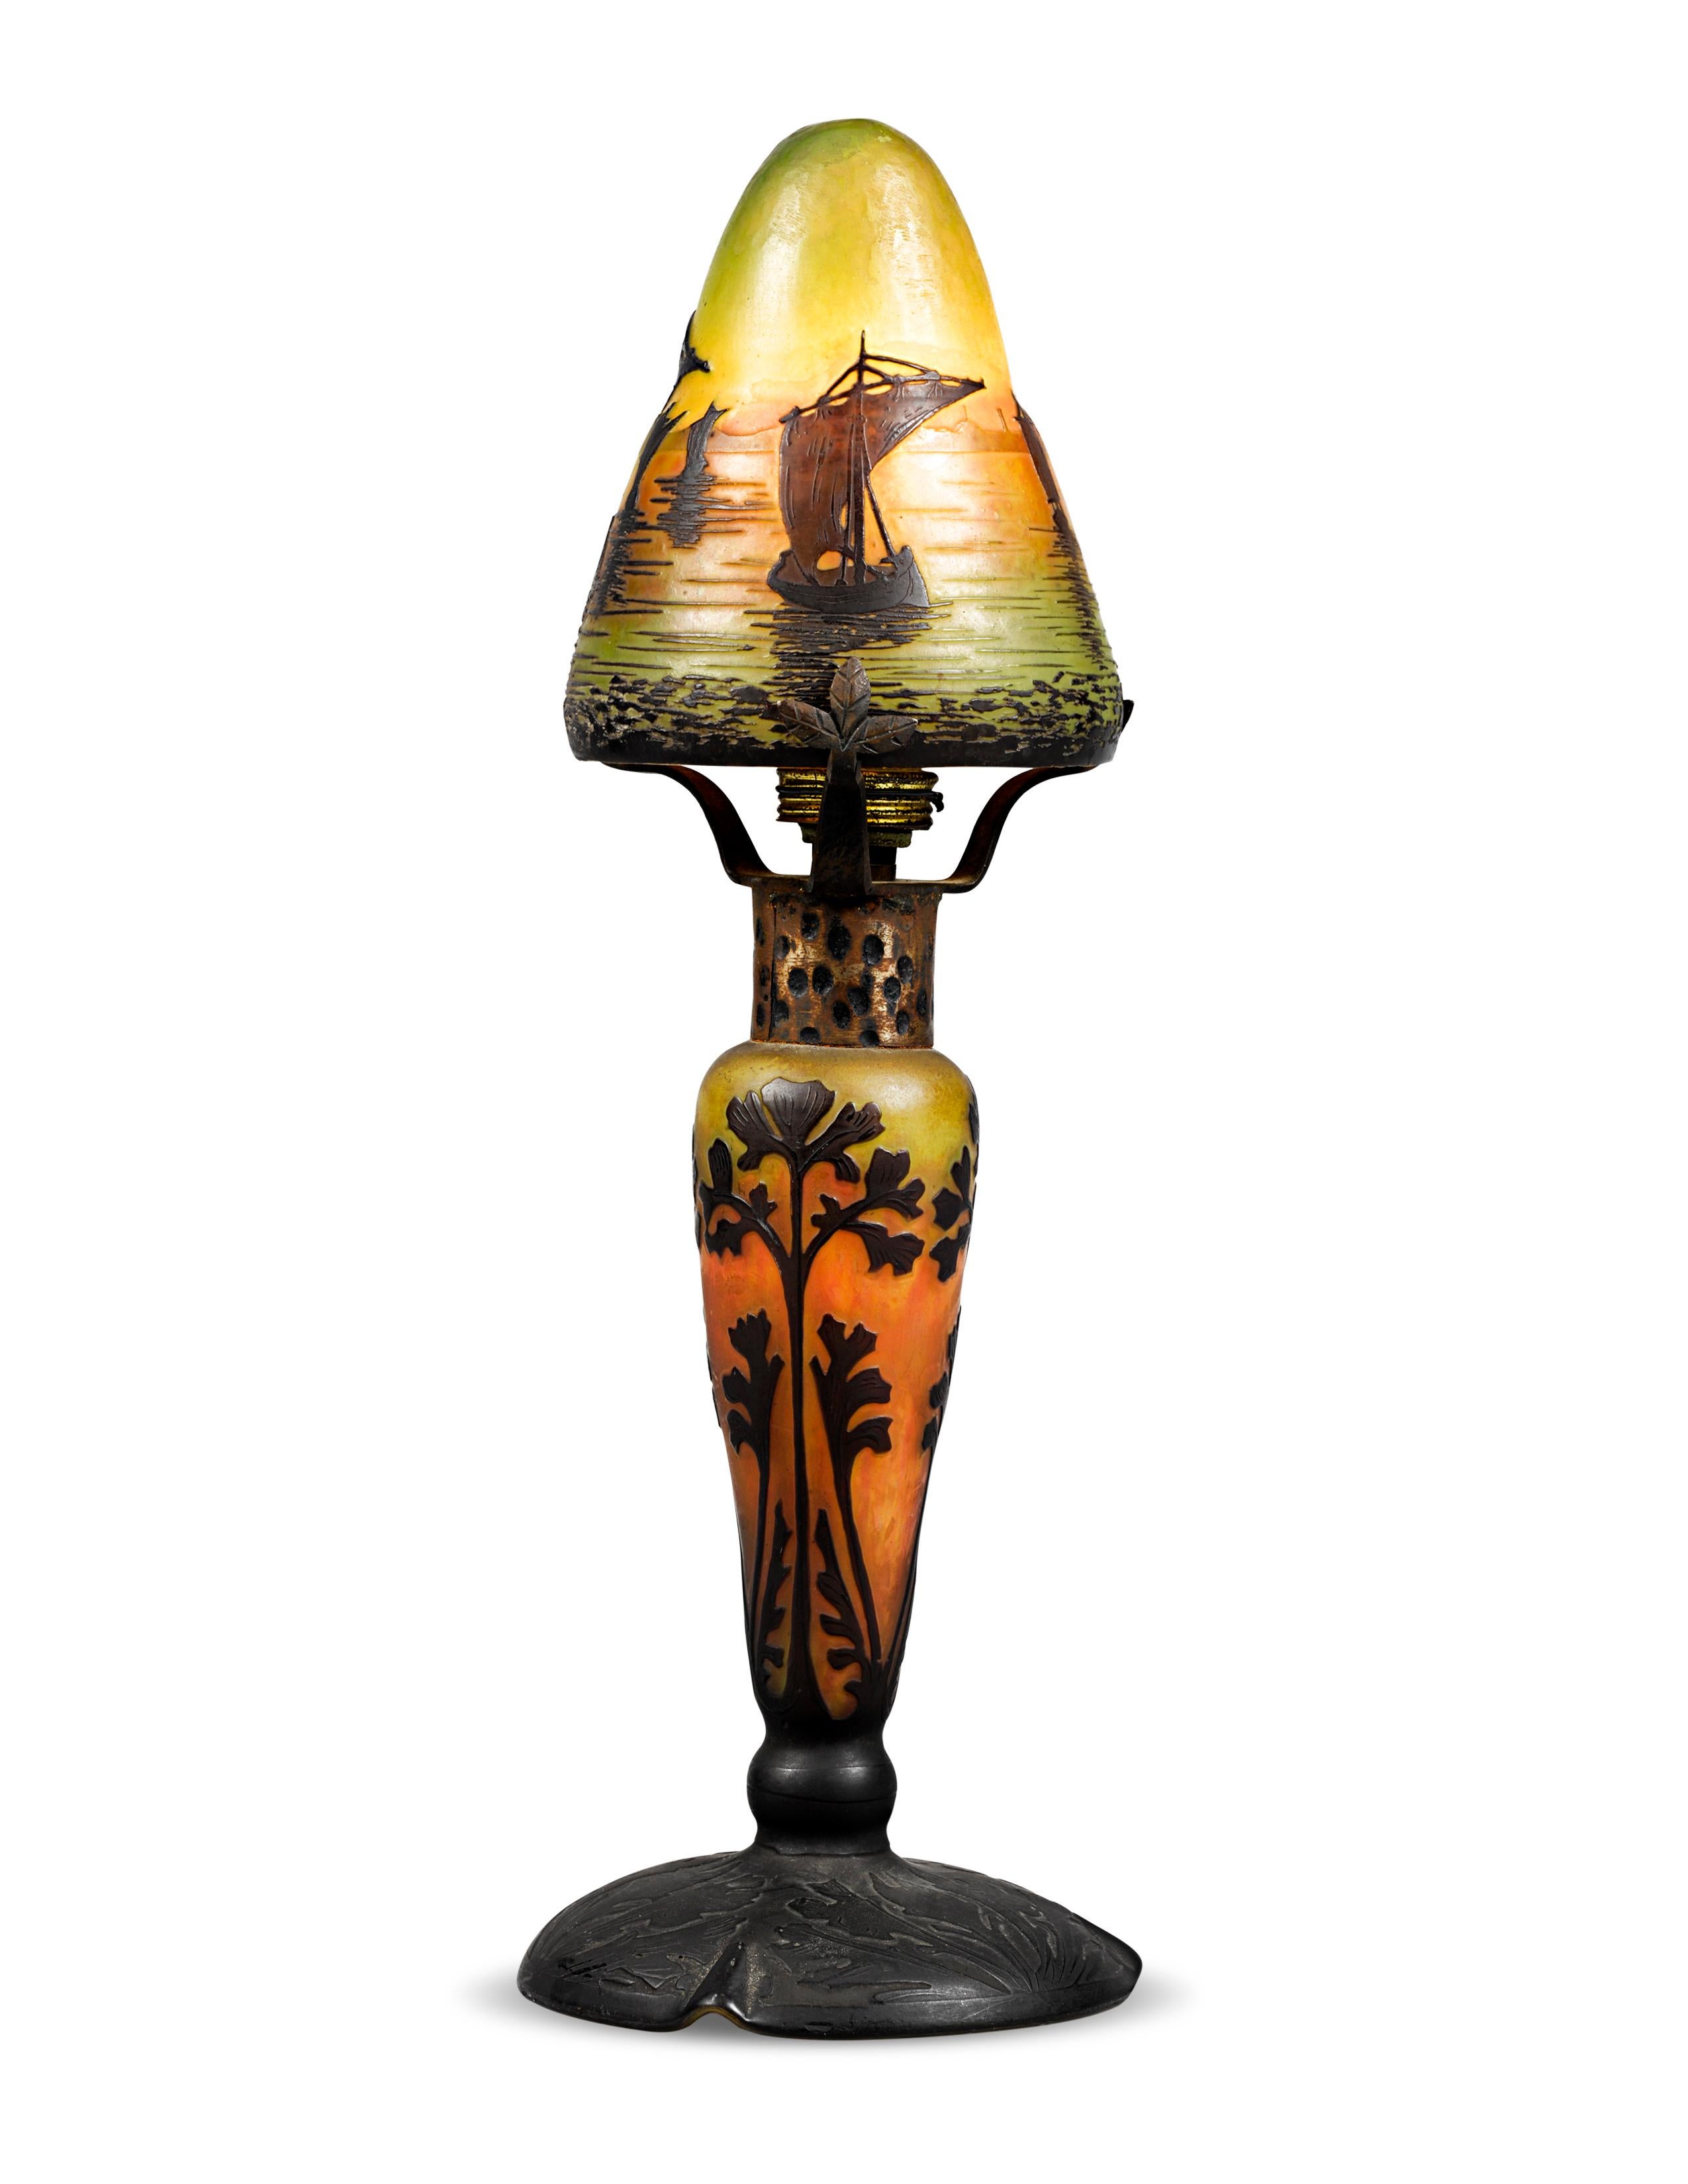 This cameo glass lamp by the renowned French glassmaking firm Daum Nancy casts an alluringly warm glow. Careful wheel-carving and acid-etching reveal layers of vibrant color, and the stunning nautical motif lends drama to the colorful background.